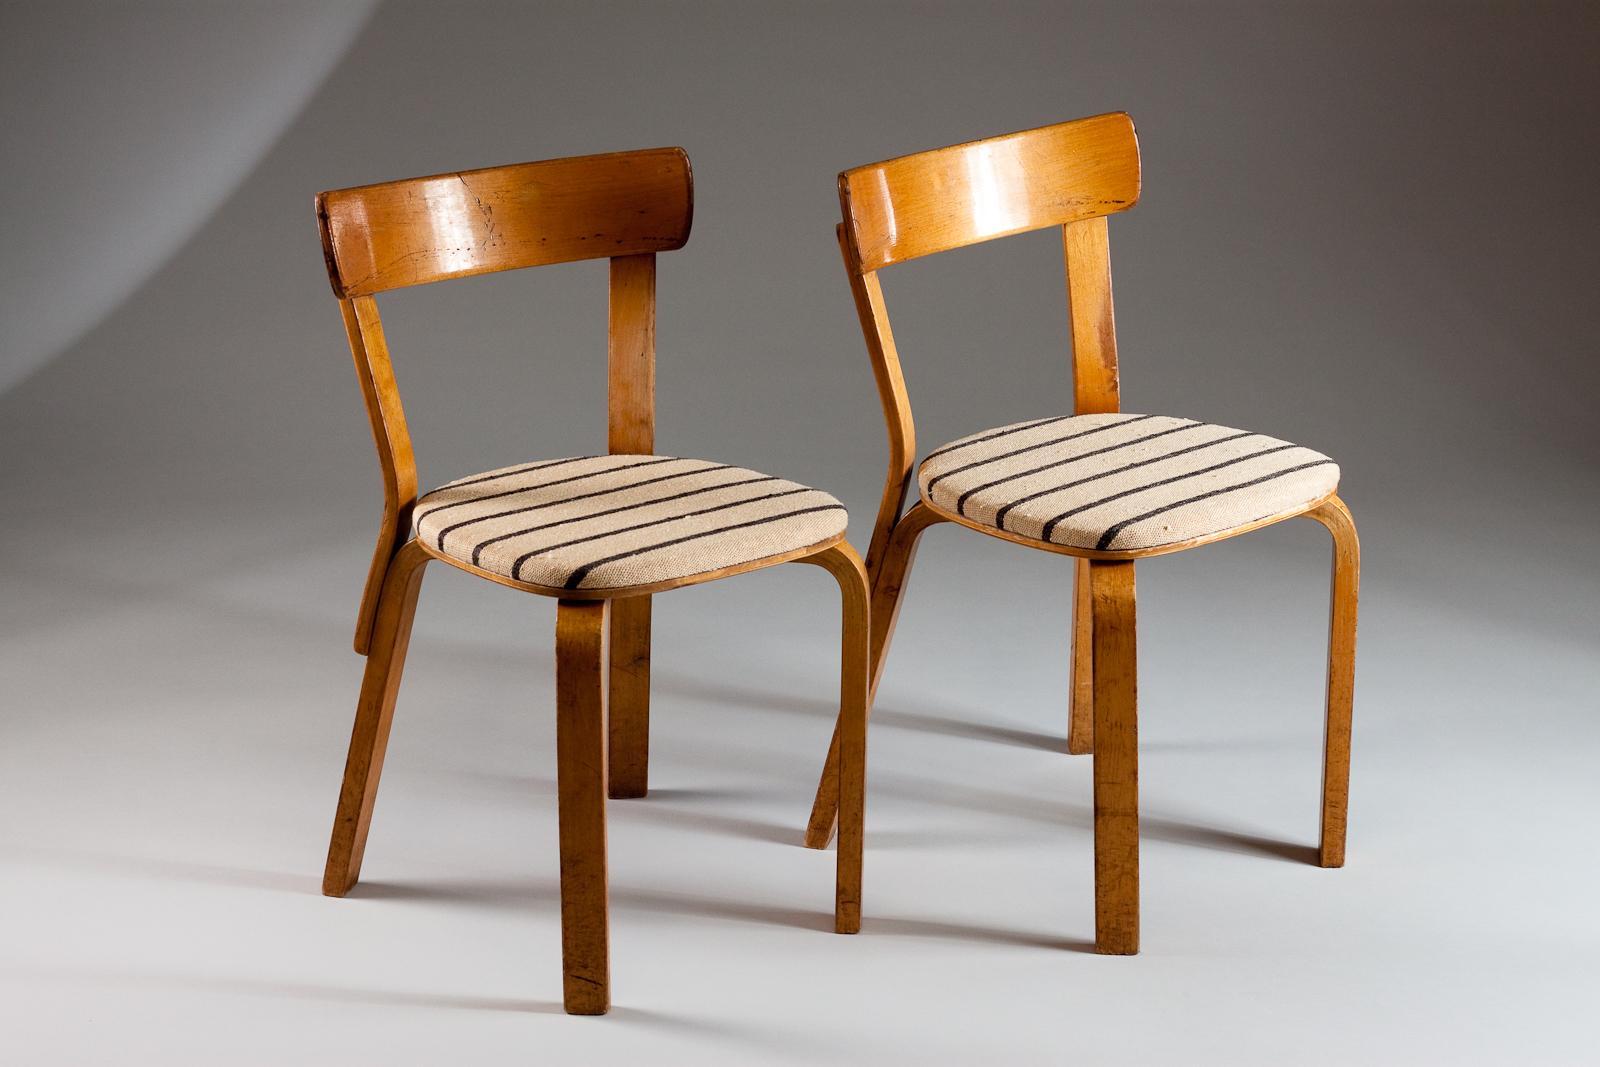 Alvar Aalto, Rare Pair of 1930s 69 Chairs with 